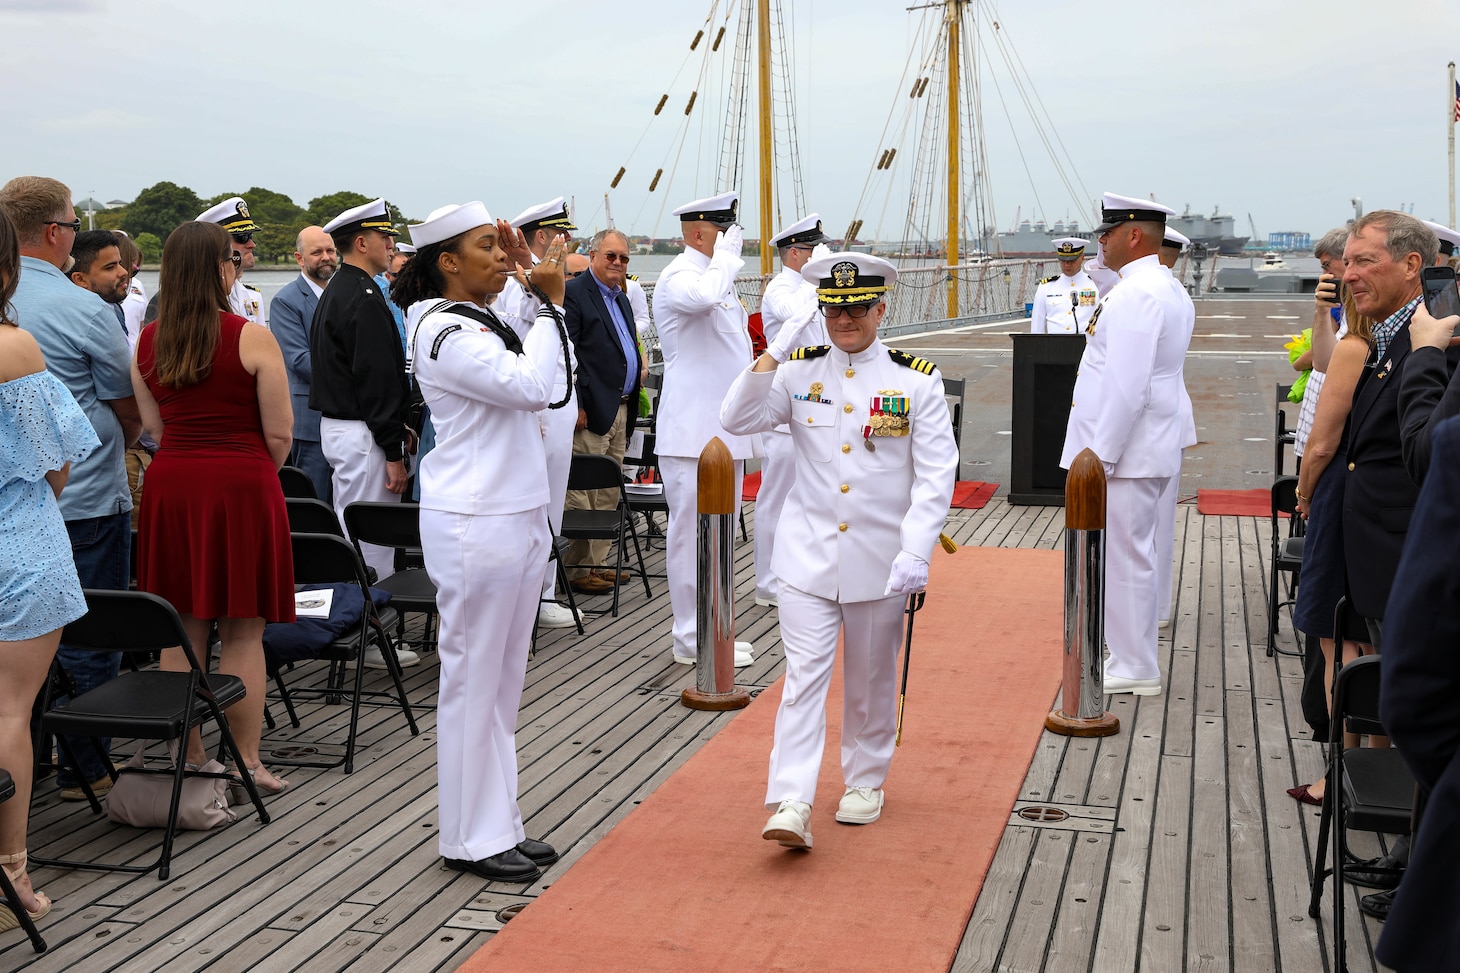 Cmdr. Ryan Heineman renders a salute to sideboys during a change of command ceremony for the Virginia-class attack submarine USS John Warner (SSN 785) aboard the decommissioned Iowa-class battleship USS Wisconsin.